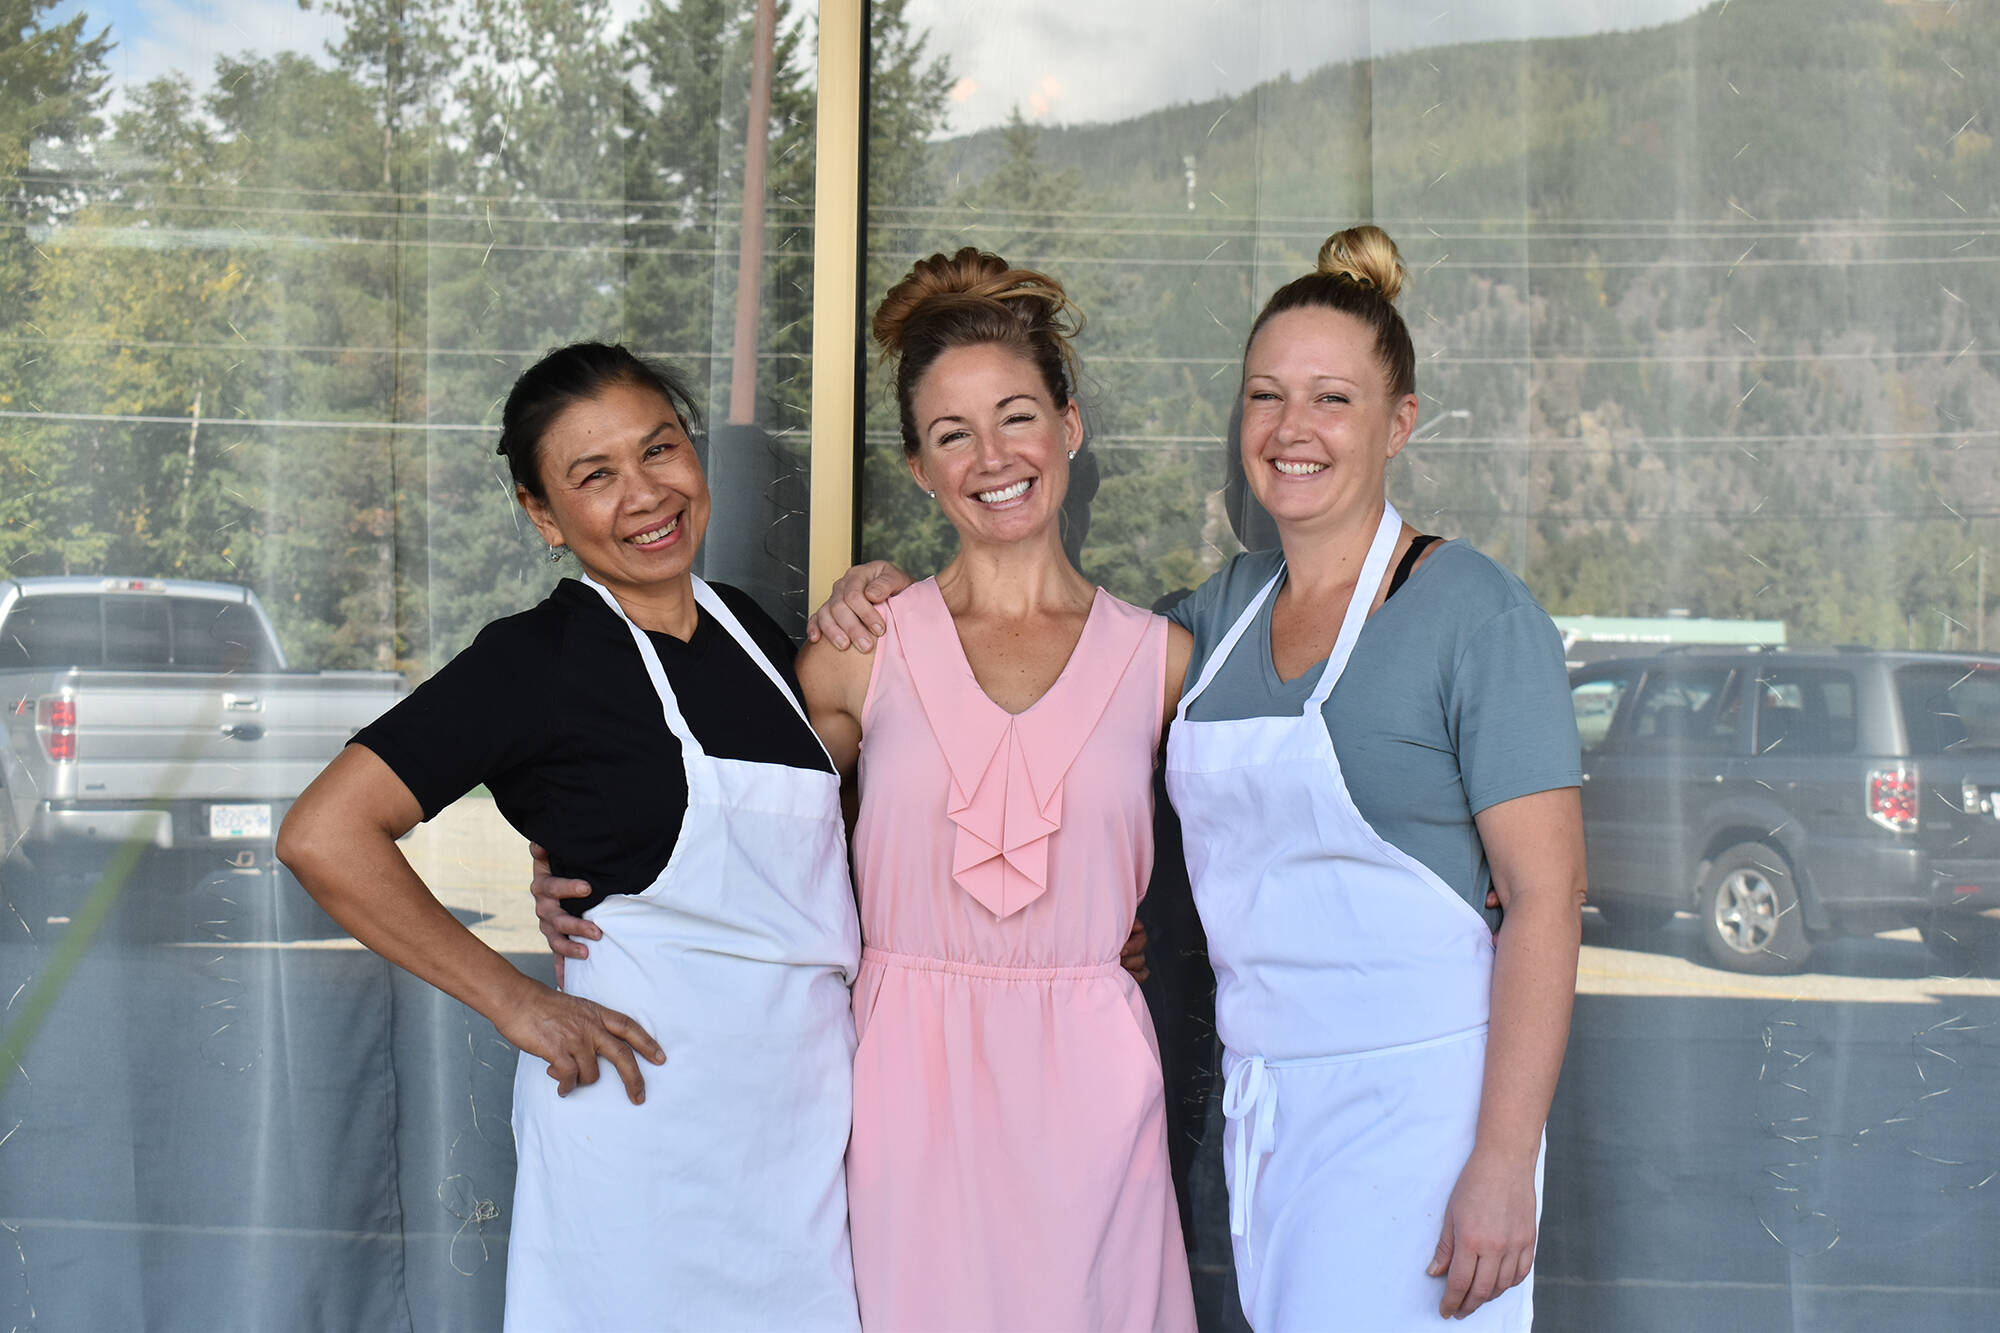 From left to right: Chalaem Junmusi, Samara Palmer, and Haley Palmer. The three restaurateurs run Aroy Maak Thai Cuisine, a new restaurant at the Parkland Shopping Centre in Sicamous. (Zachary Roman/Eagle Valley News)